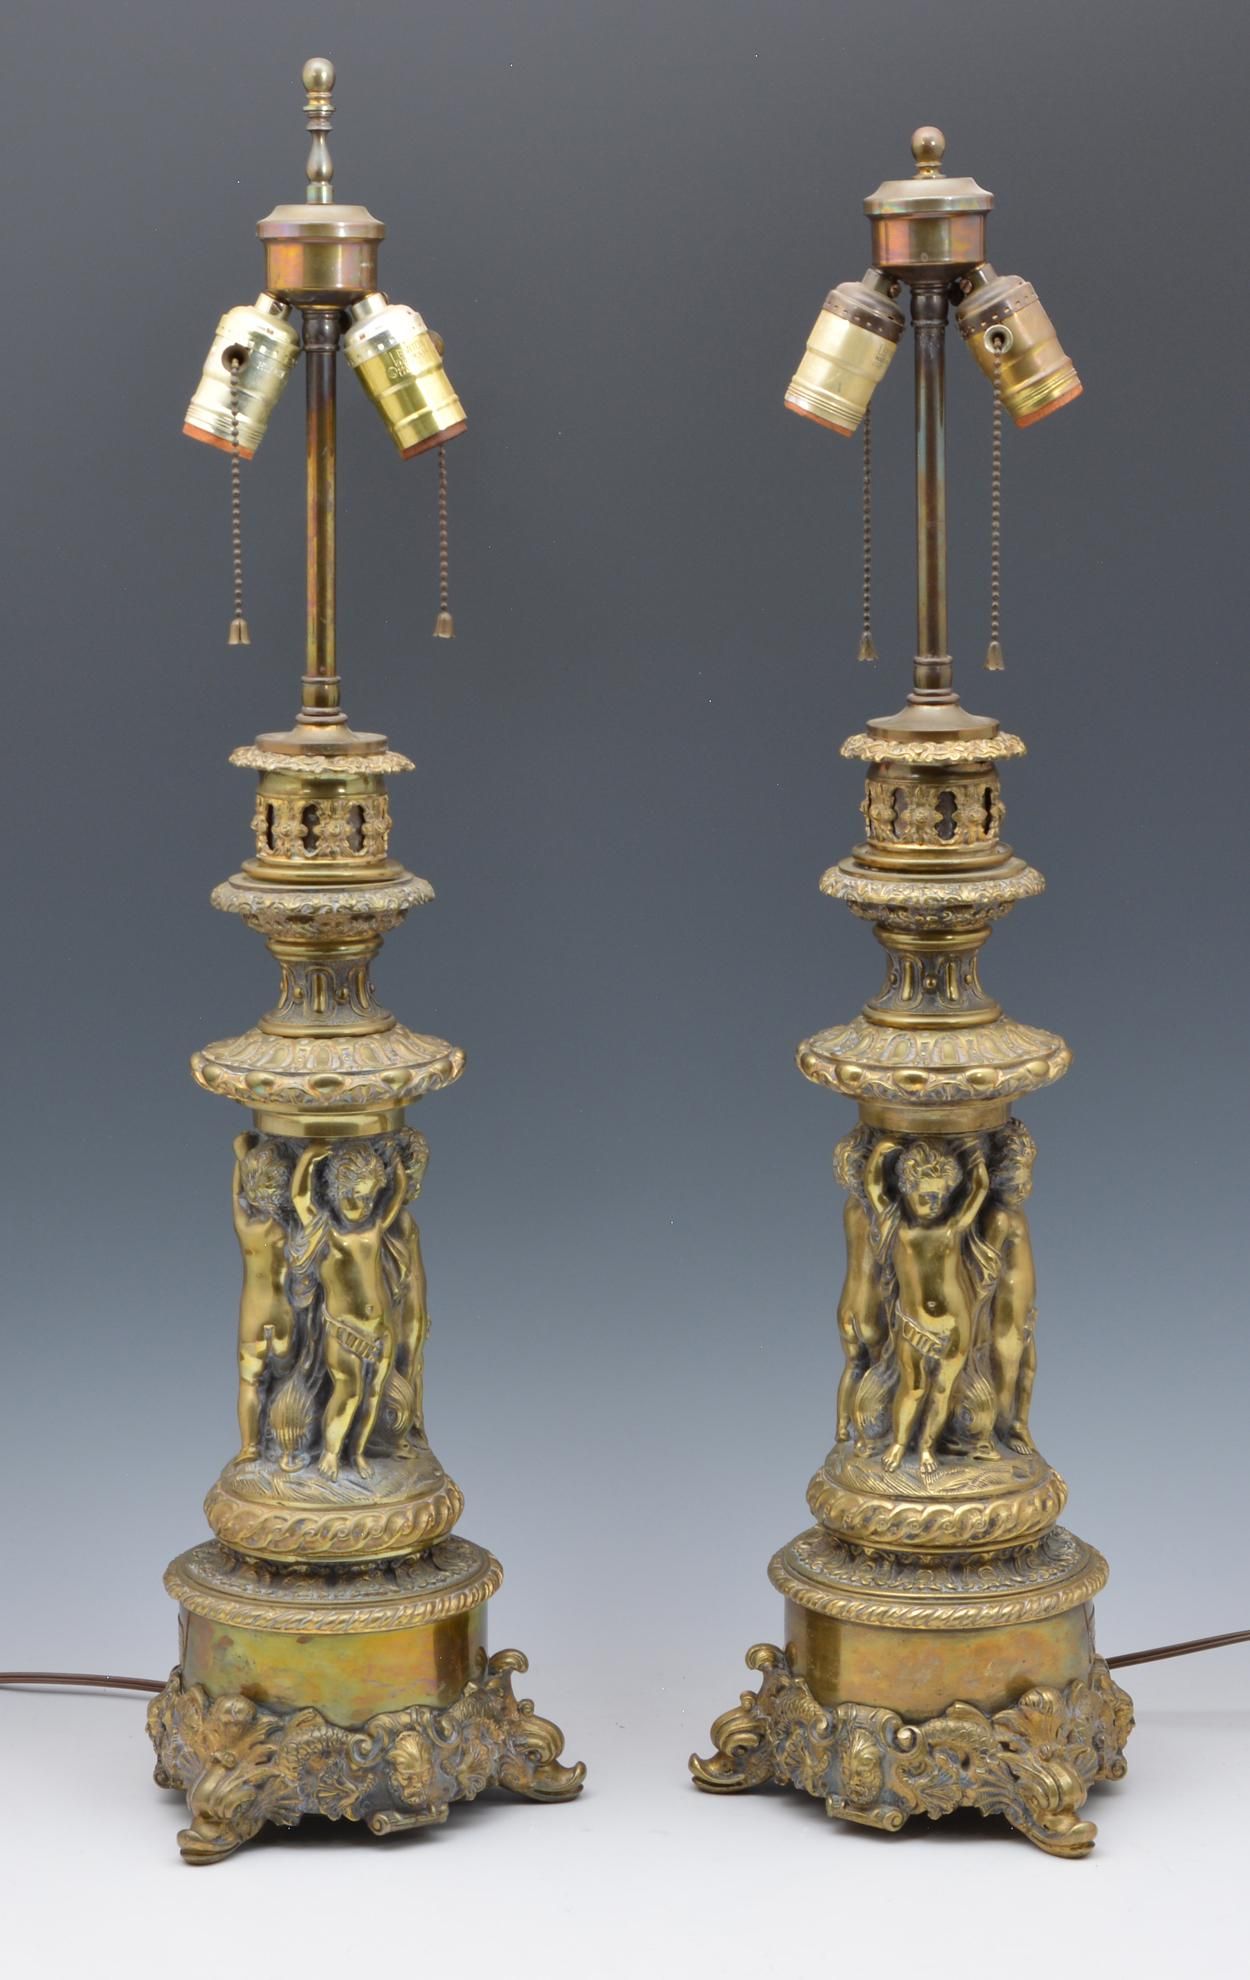 PAIR OF NEOCLASSICAL BRASS TABLE